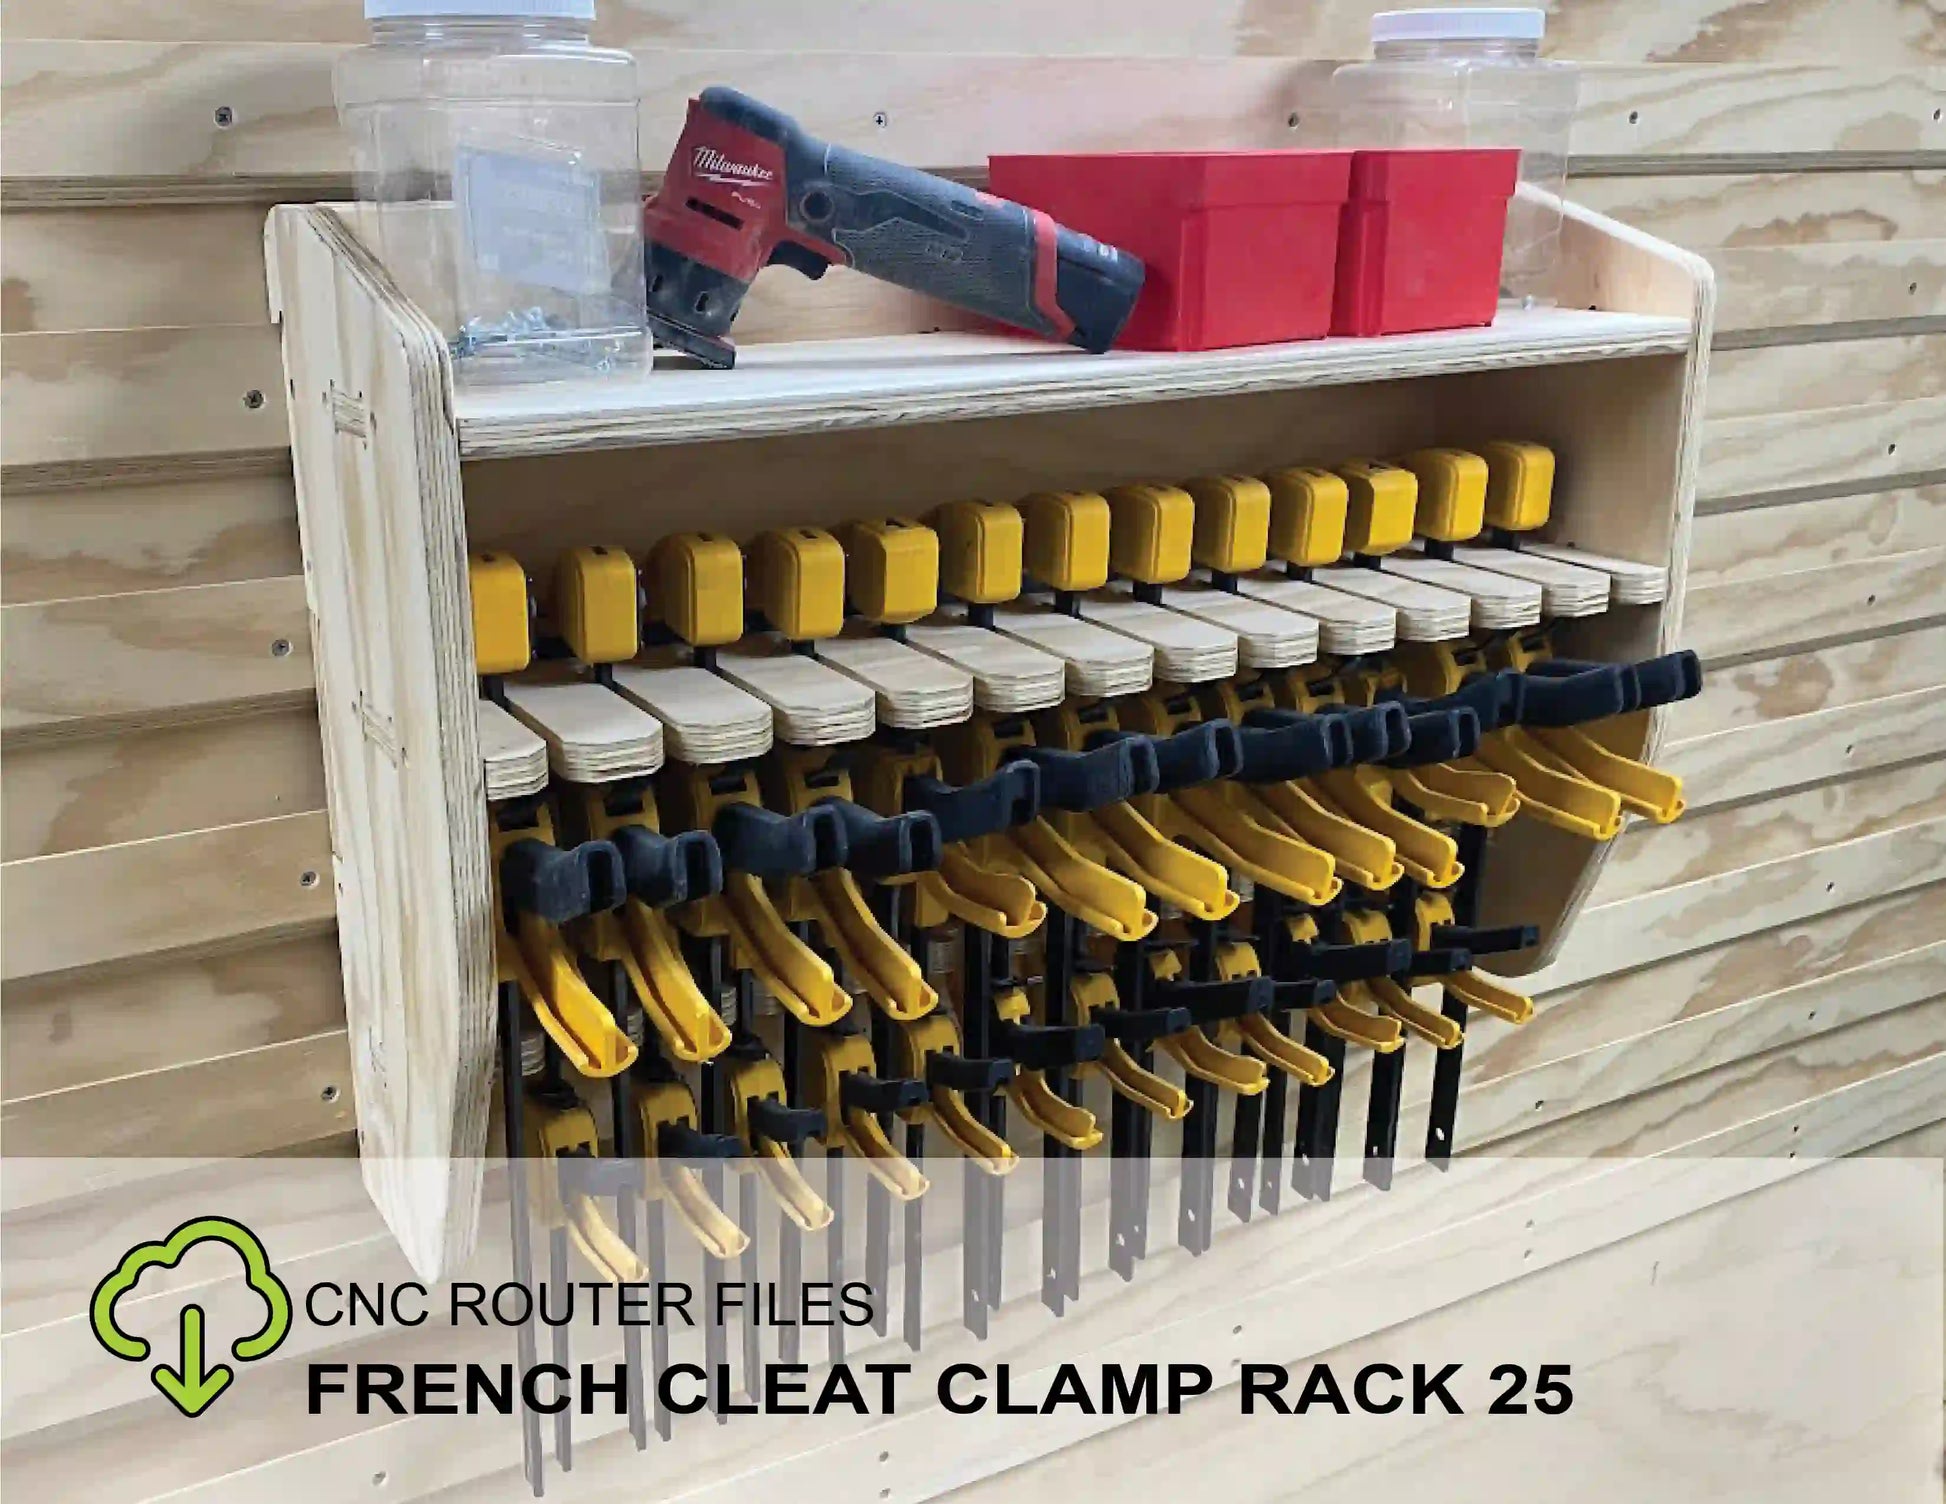 CNC router files for wood to create a clamp storage rack for a workshop to hold a lot of woodworking clamps